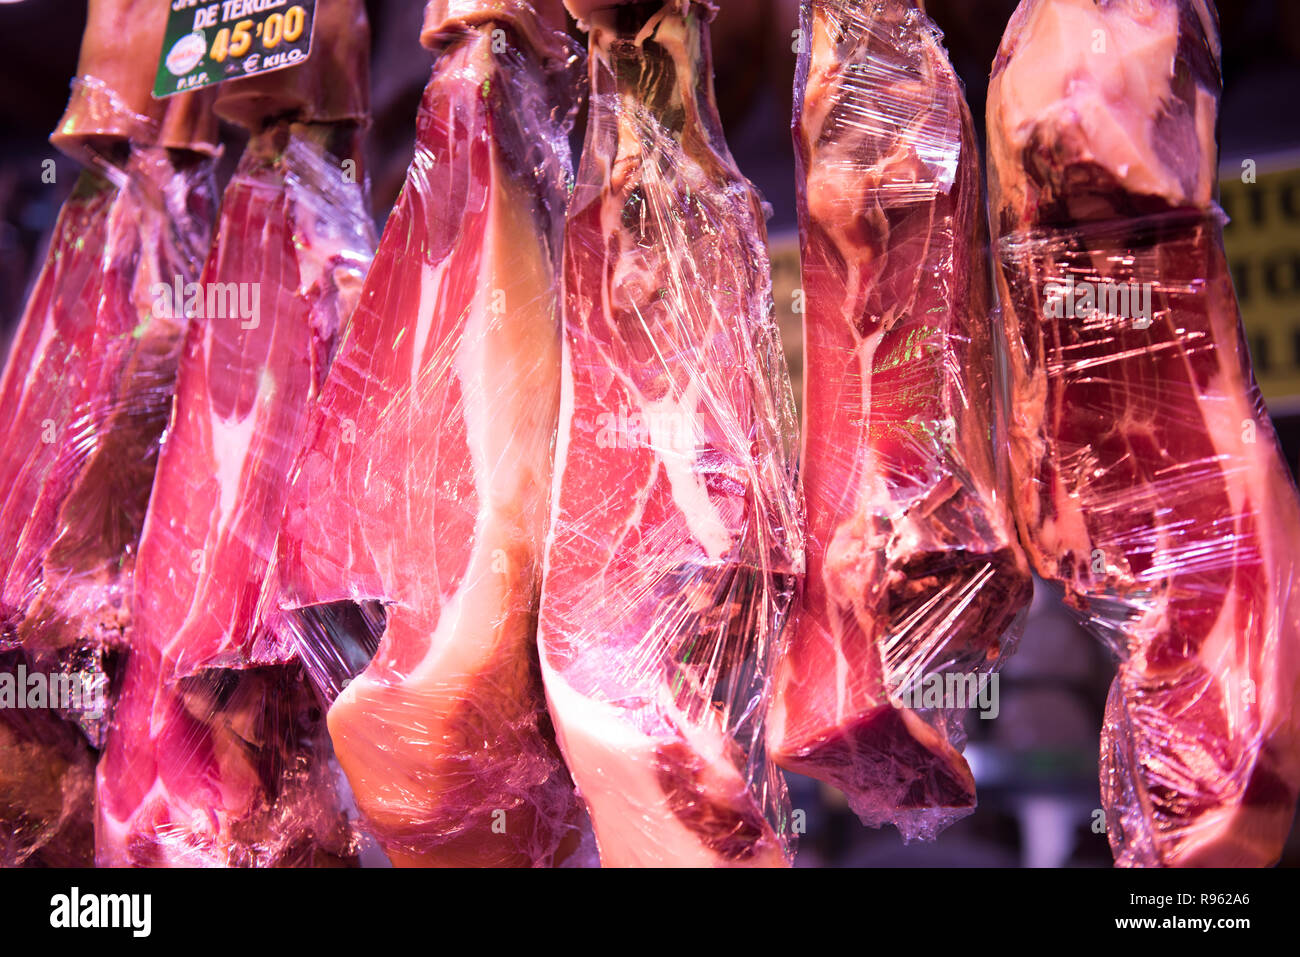 Raw, uncooked meat being displayed at a meat store for sale. The meat is seen hanging from the hooks and looks very fresh and healthy. Stock Photo